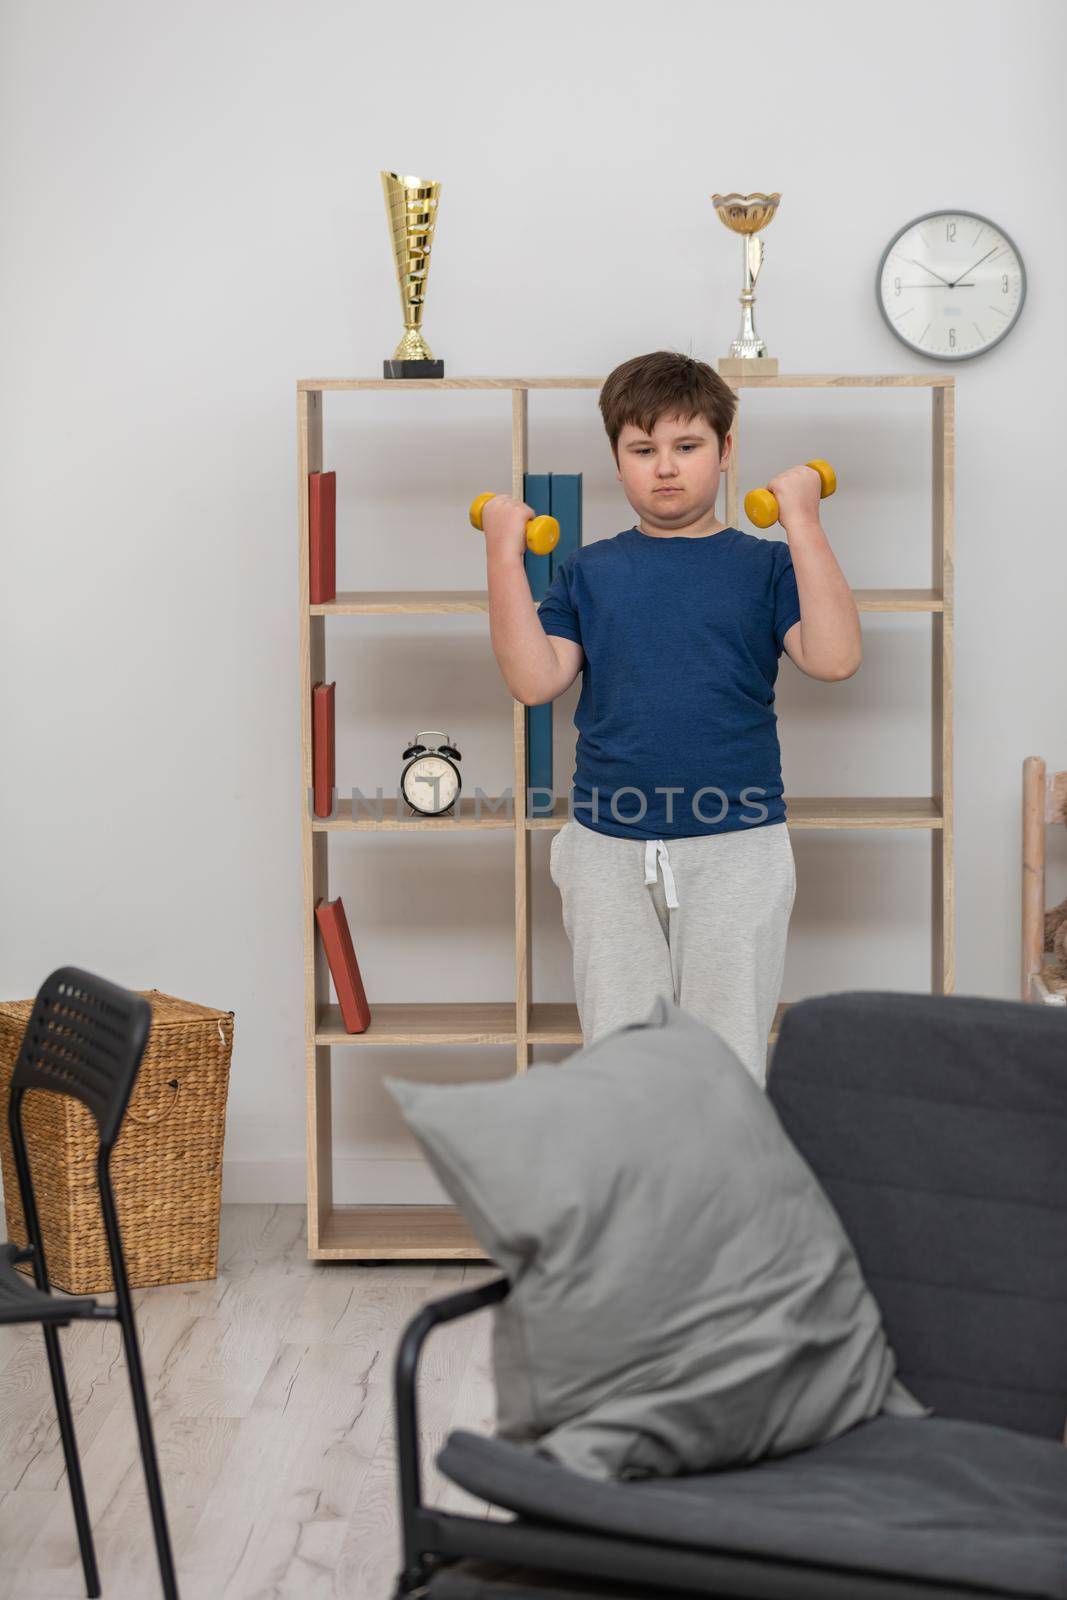 The 10-year-old has made decisions and exercises his arm and chest muscles with dumbbells. He takes care of his fitness.